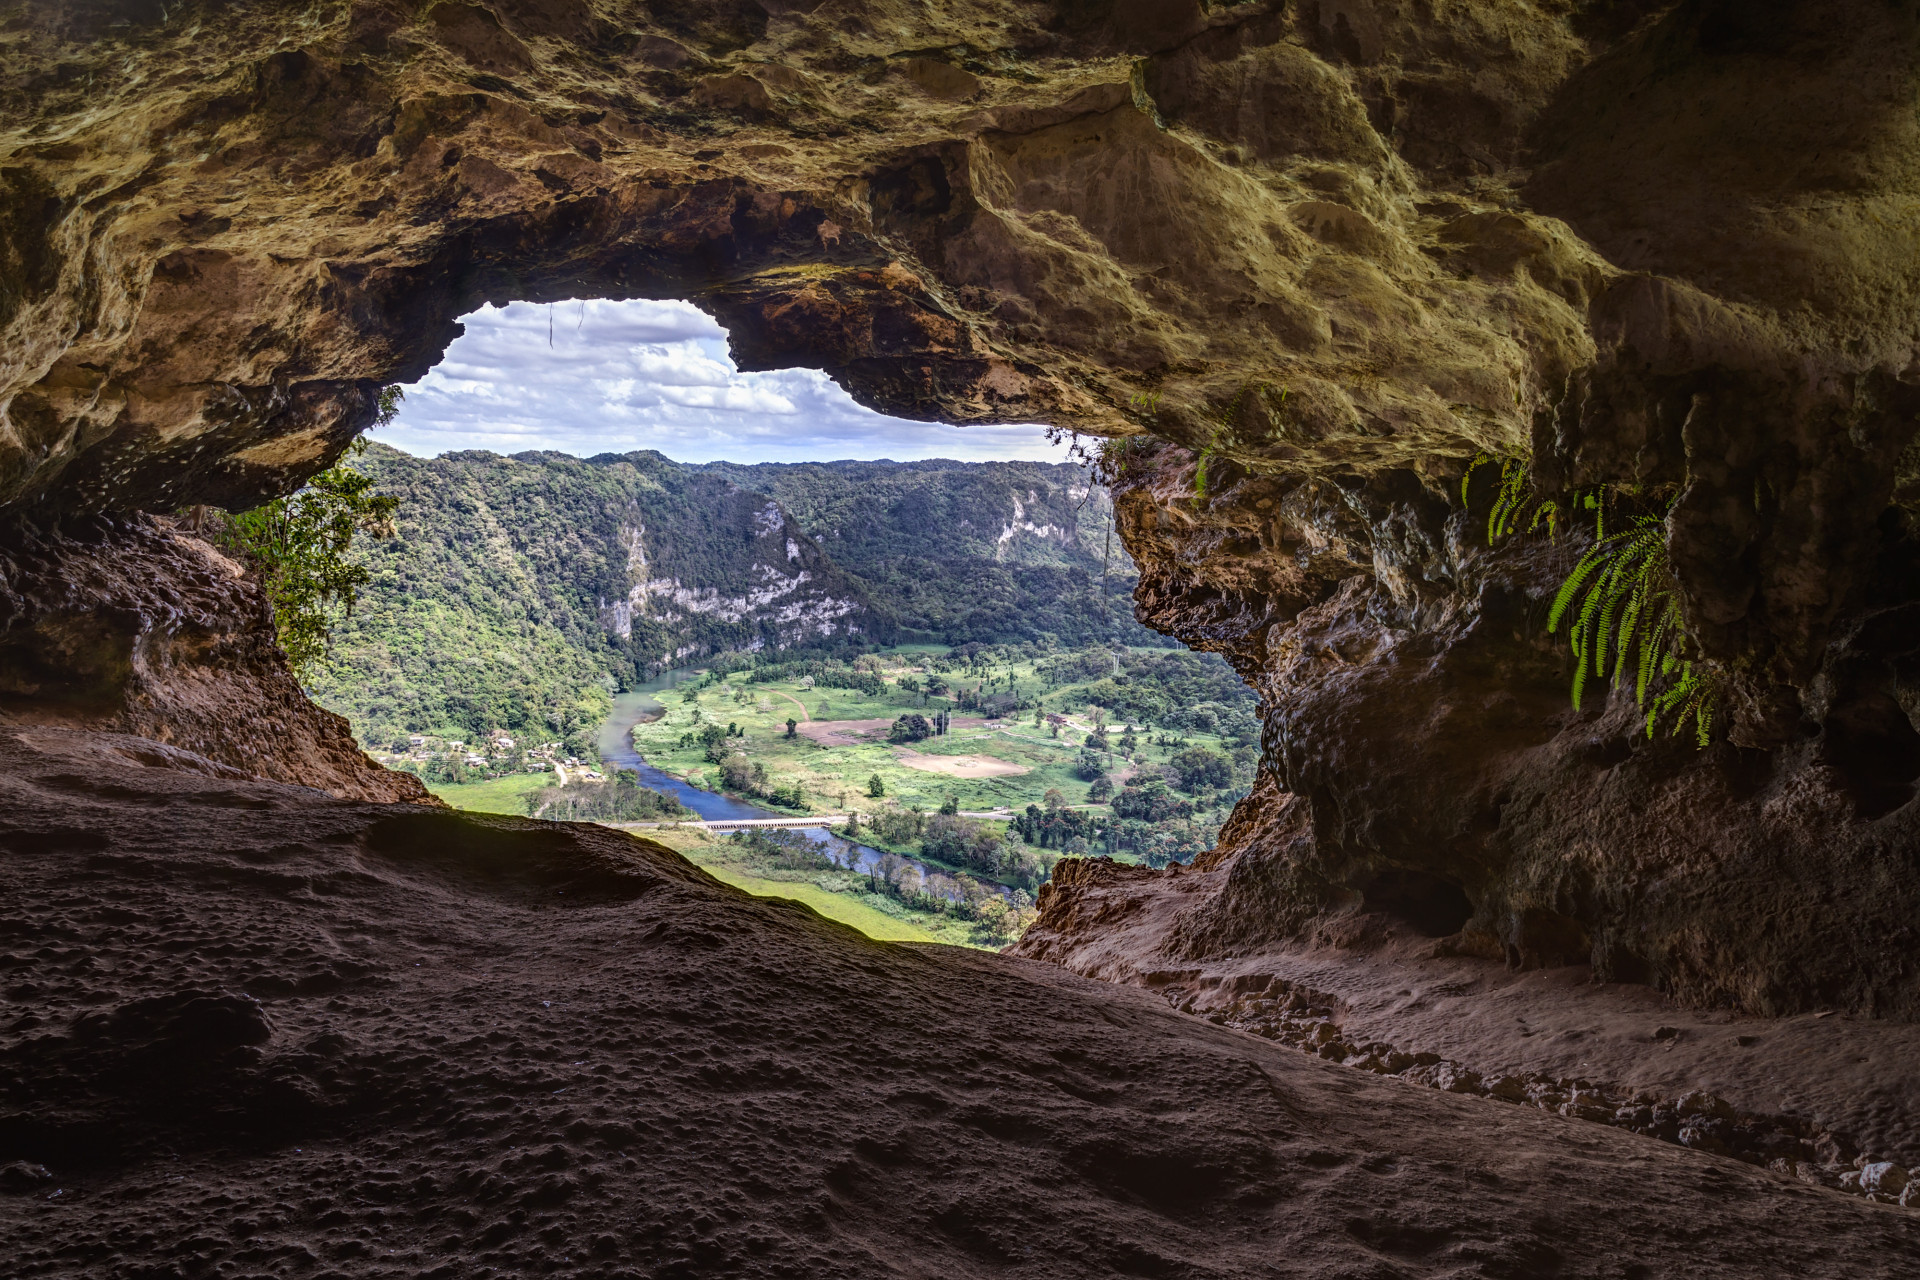 This limestone cave in Arecibo is a great place to see stalagmites and stalactites, and it also offers a view of the beautiful valley below.<p>You may also like:<a href="https://www.starsinsider.com/n/443679?utm_source=msn.com&utm_medium=display&utm_campaign=referral_description&utm_content=173131en-us"> Famous flyers: These celebrities are licensed pilots</a></p>